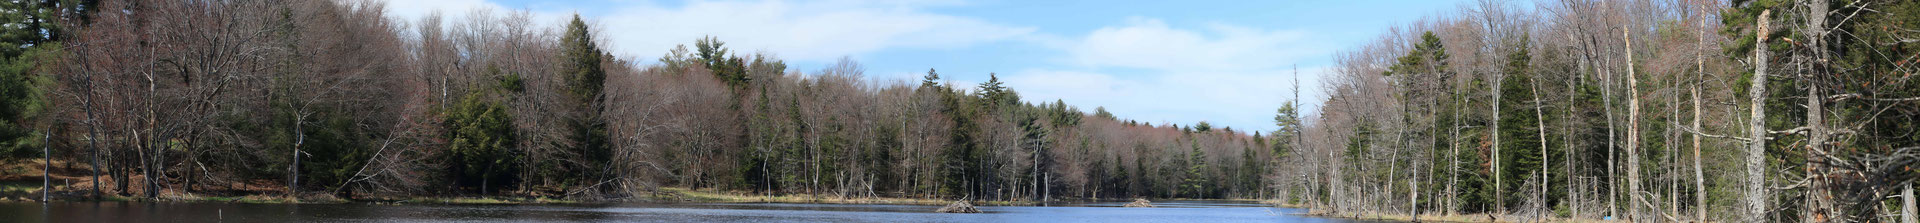 Dyken Pond, NY, USA. Canon EOS 80D, EF 70-300mm f/4-5.6 IS II USM à 70mm, f/10, 1/125s, 300 ISO